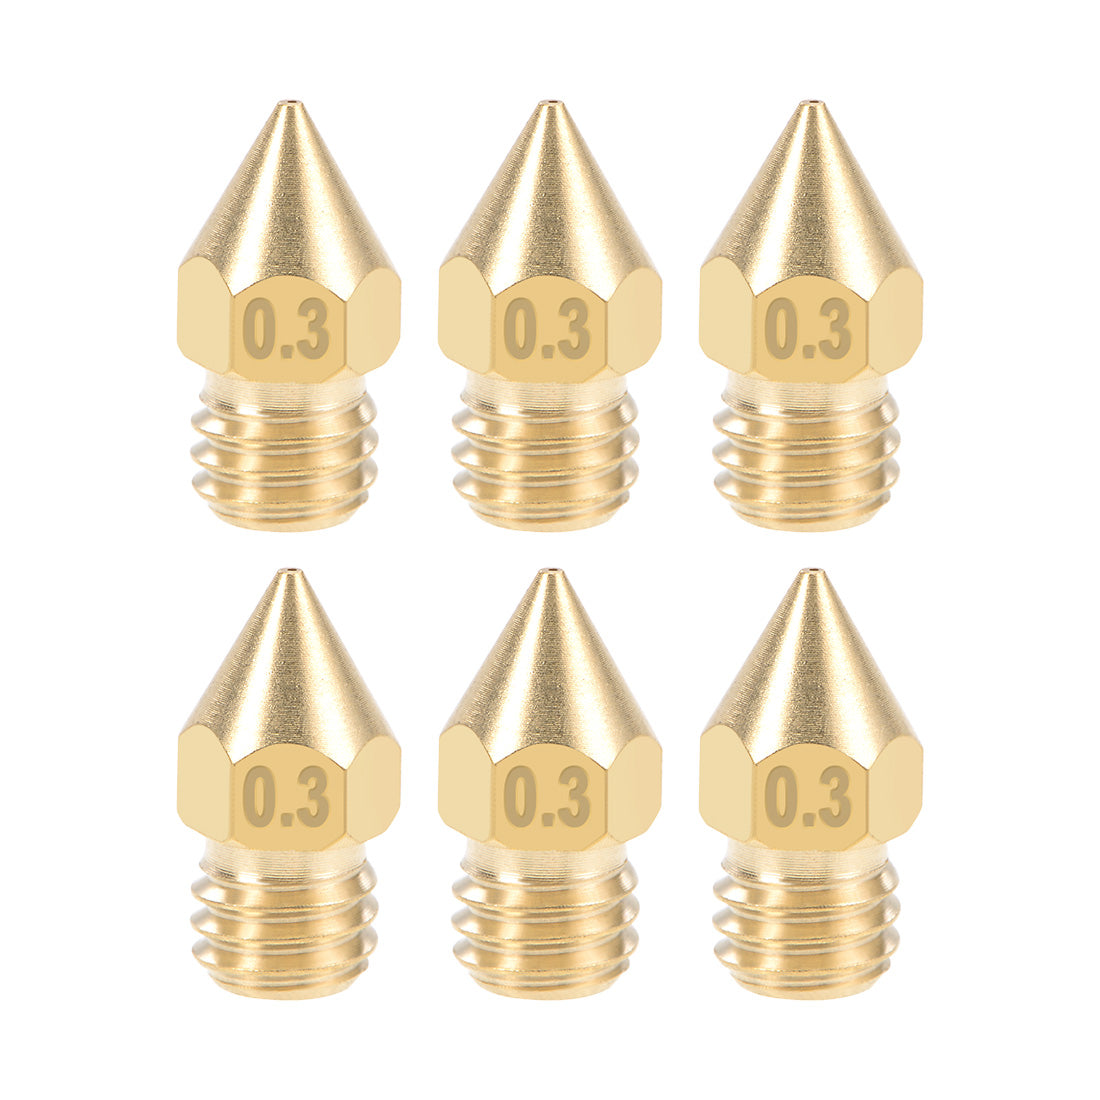 uxcell Uxcell 0.3mm 3D Printer Nozzle Head M6 for MK8 1.75mm Extruder Print, Brass 6pcs